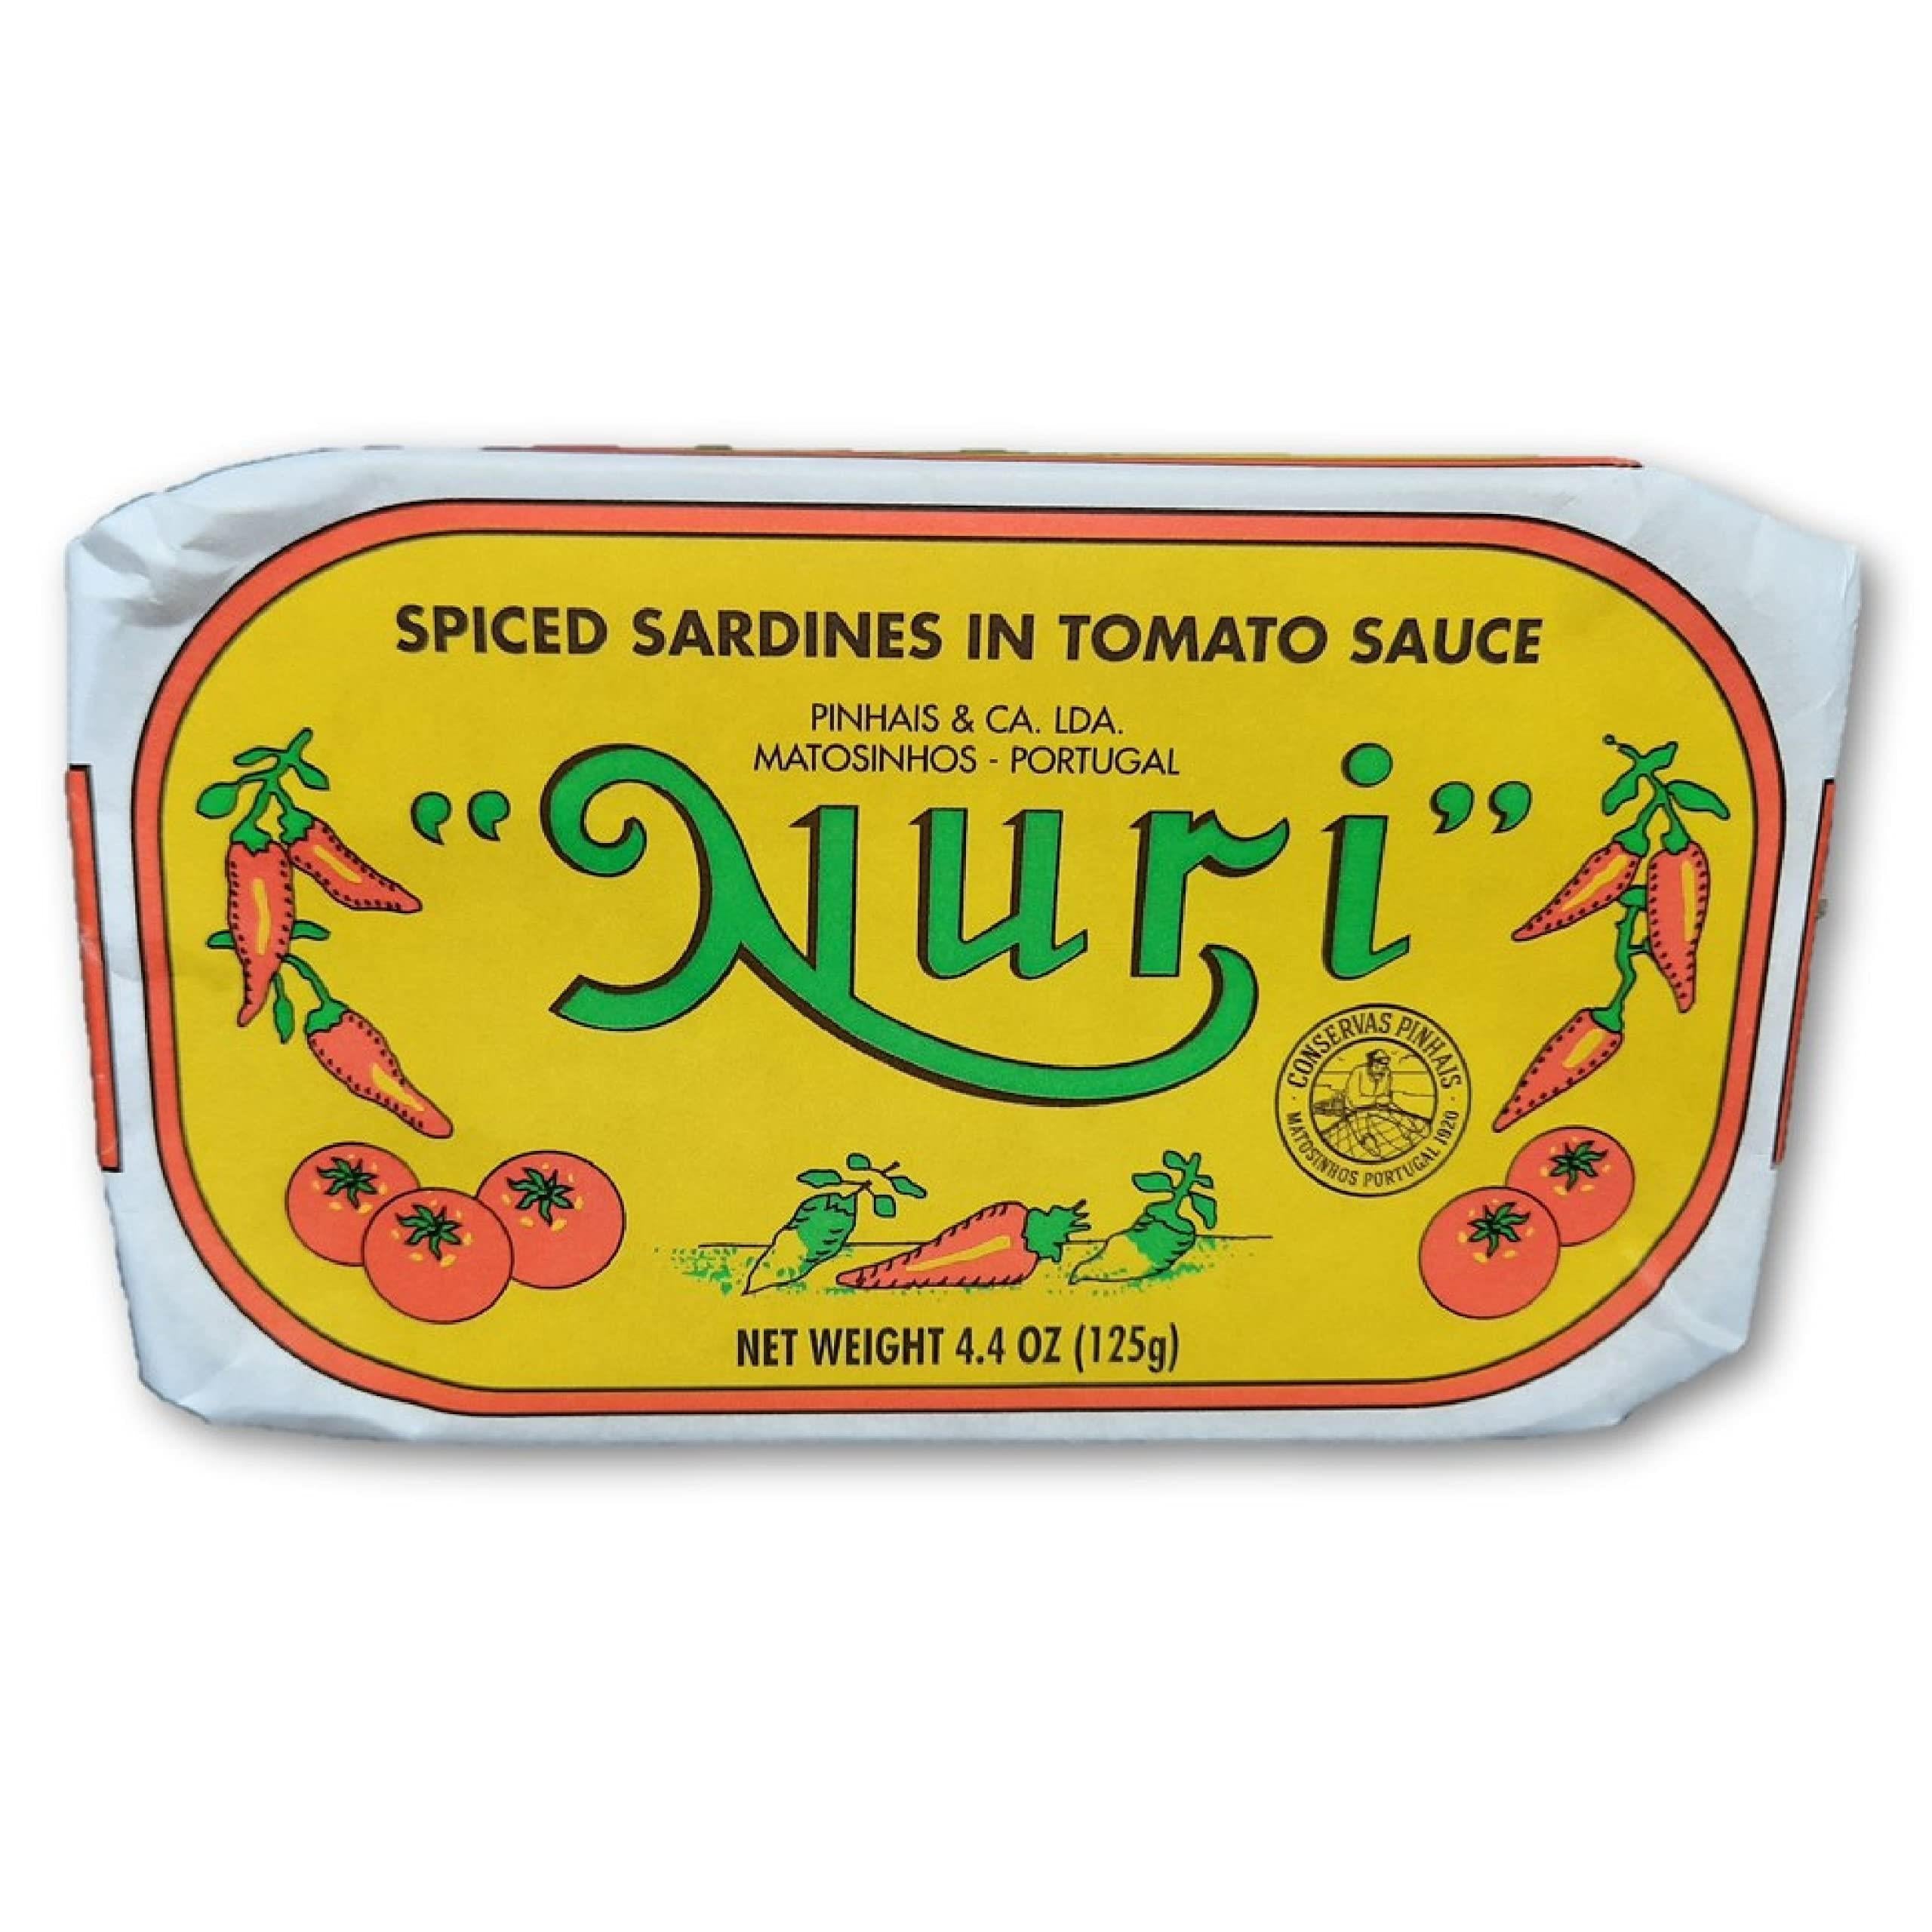 NURI Portuguese Sardines in Spiced Tomato Sauce - 8 Pack - (4.4 oz cans)